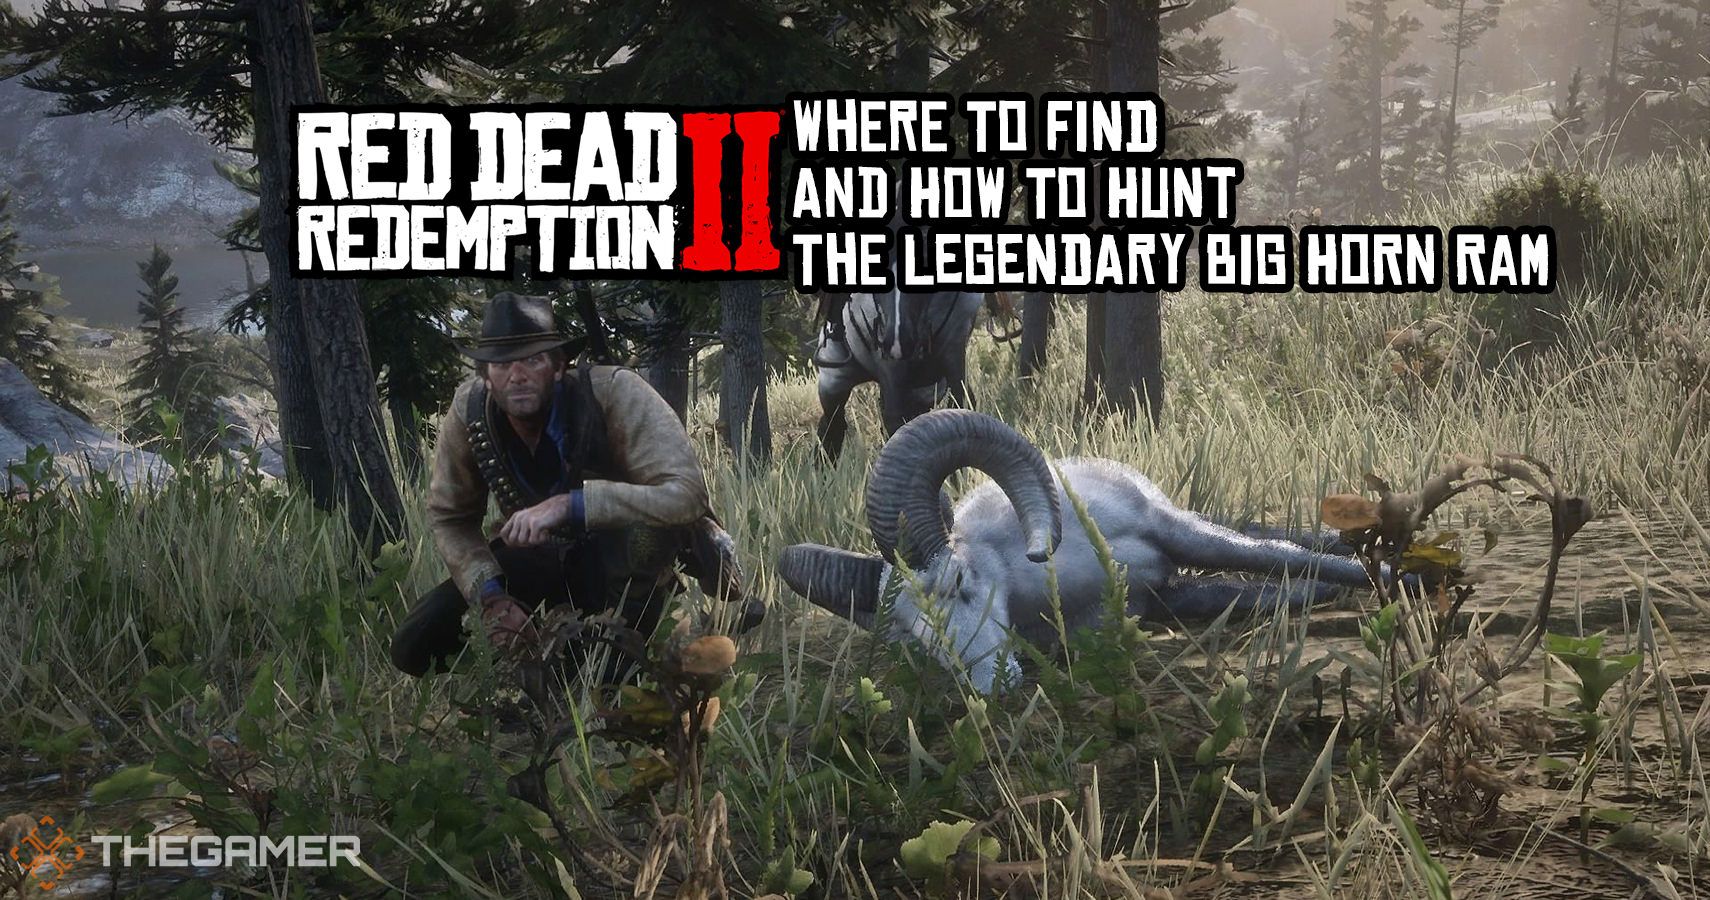 Dead Redemption 2: To Find And How Hunt Legendary Big Horn Ram